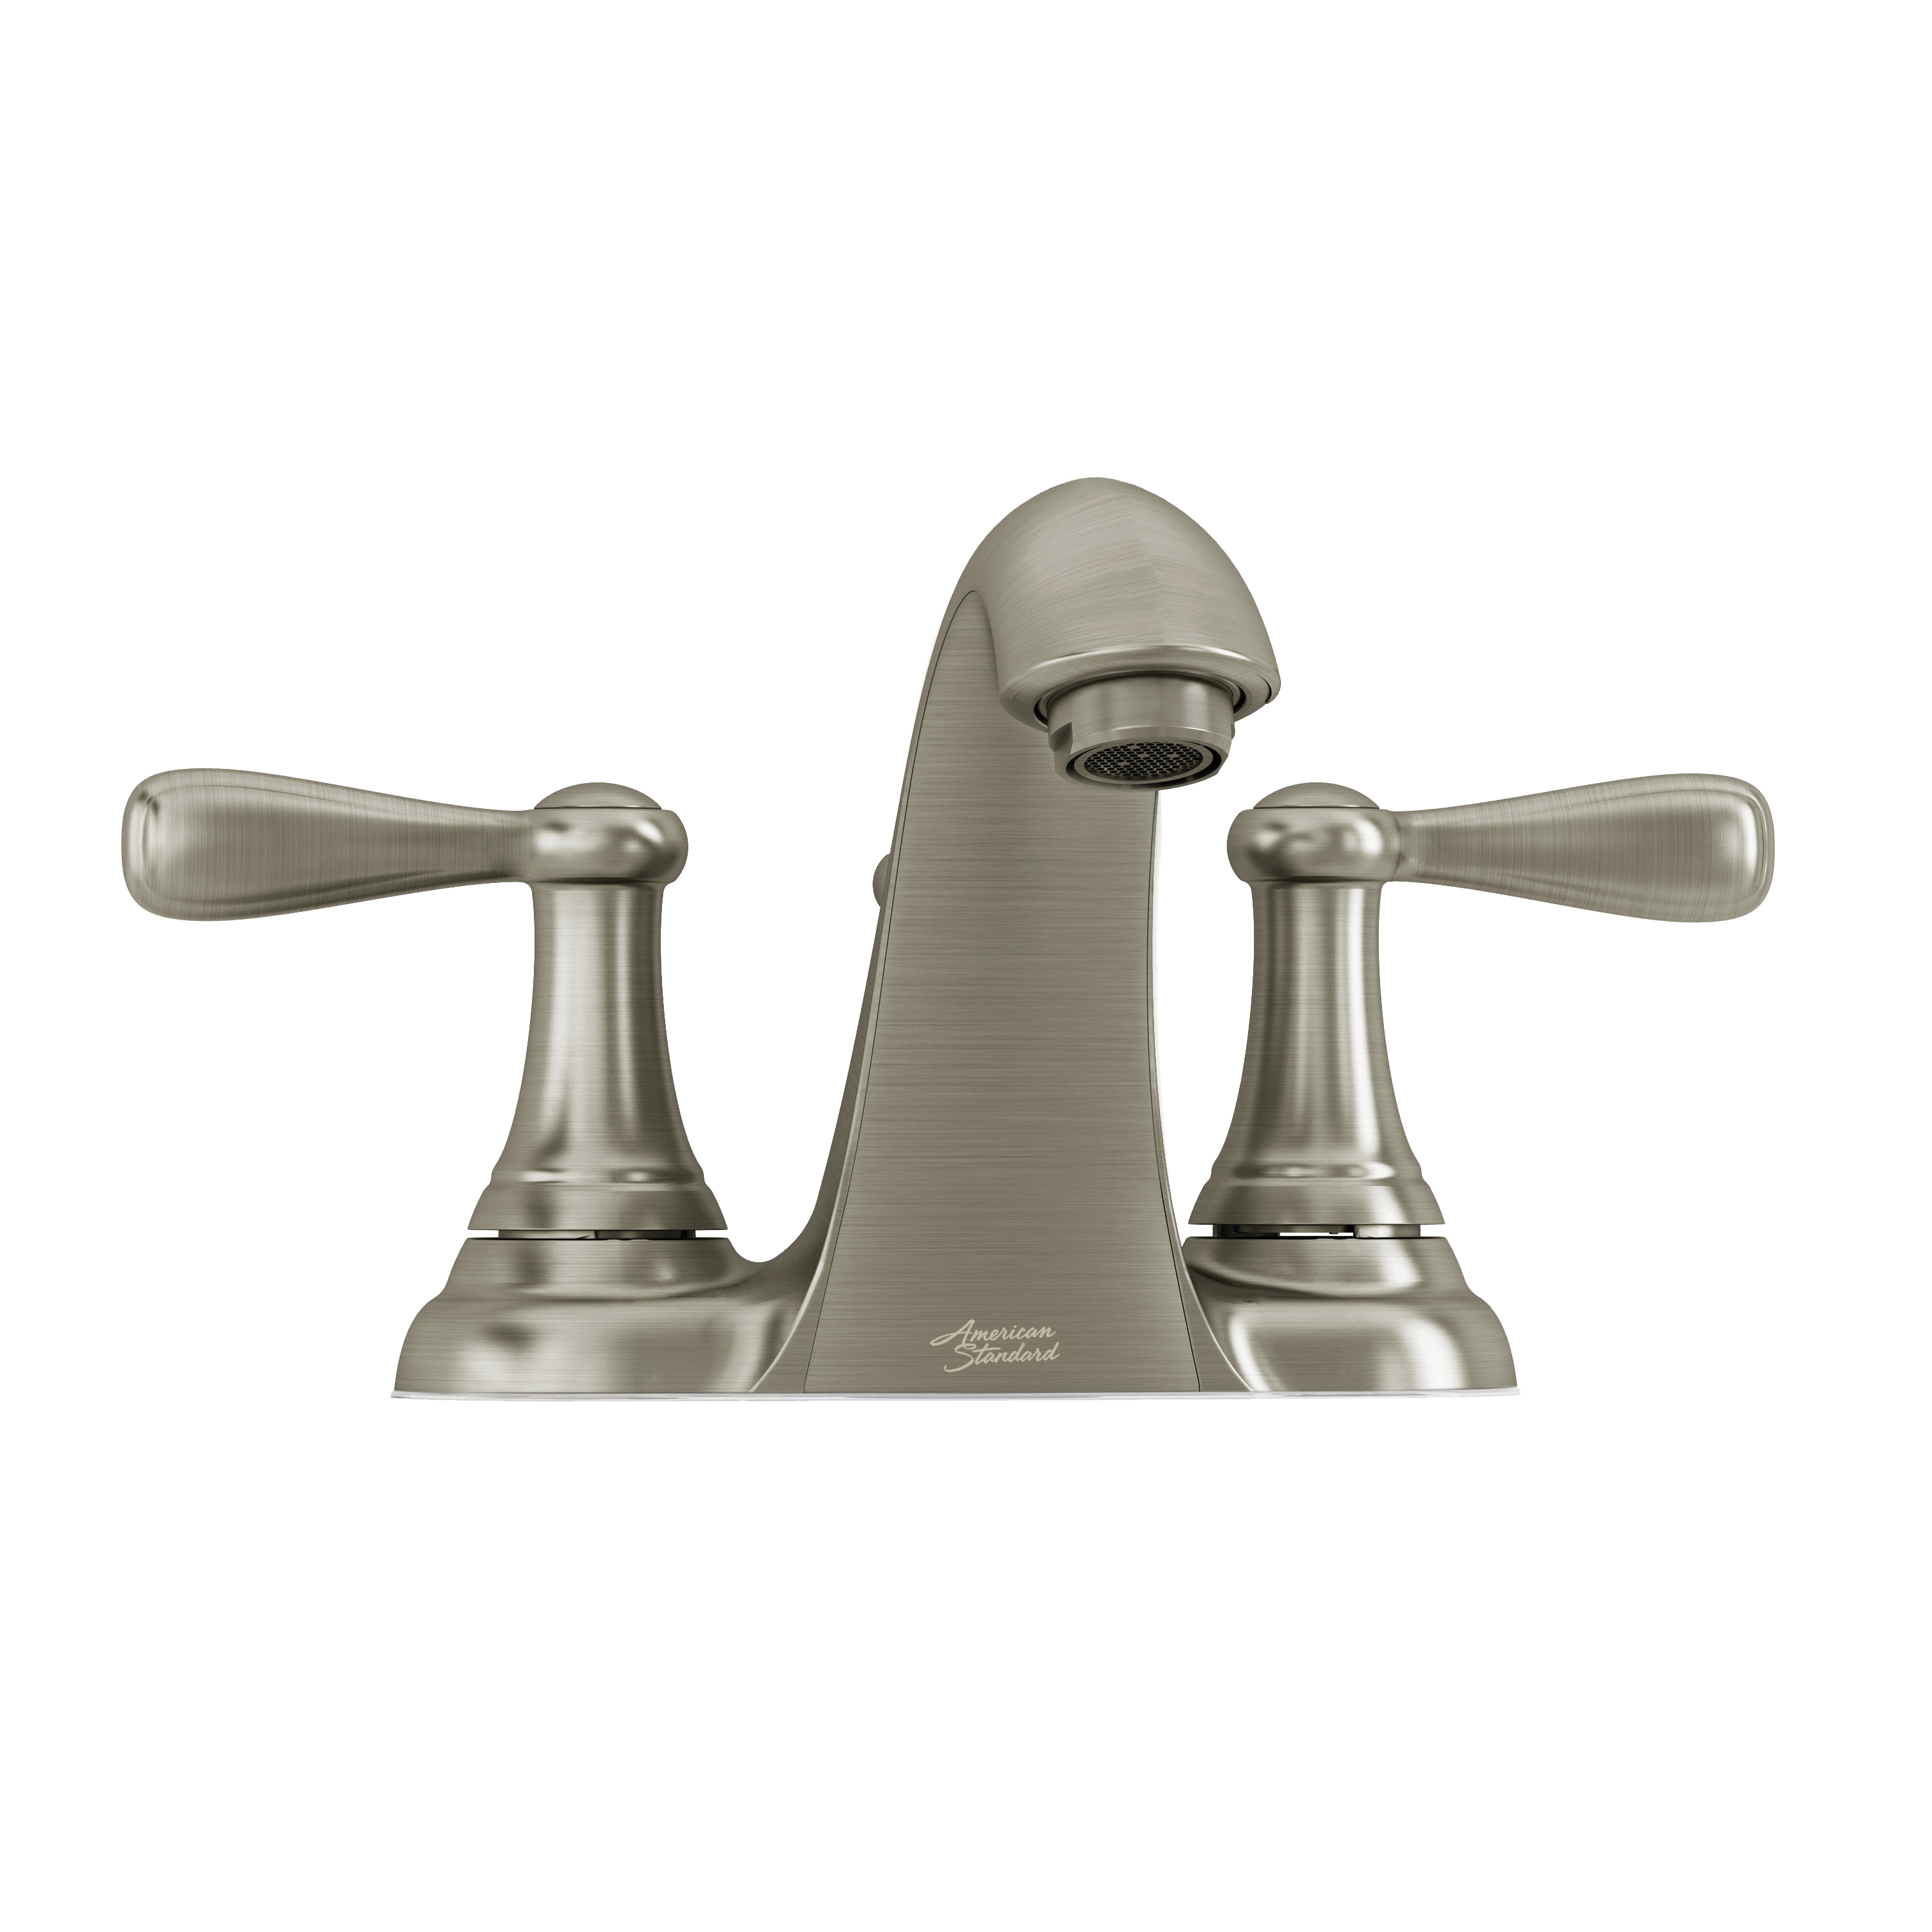 Marquette 7764SF Bathroom Faucet, 1.5 gpm, 2-Faucet Handle, Metal, Brushed Nickel, Lever Handle